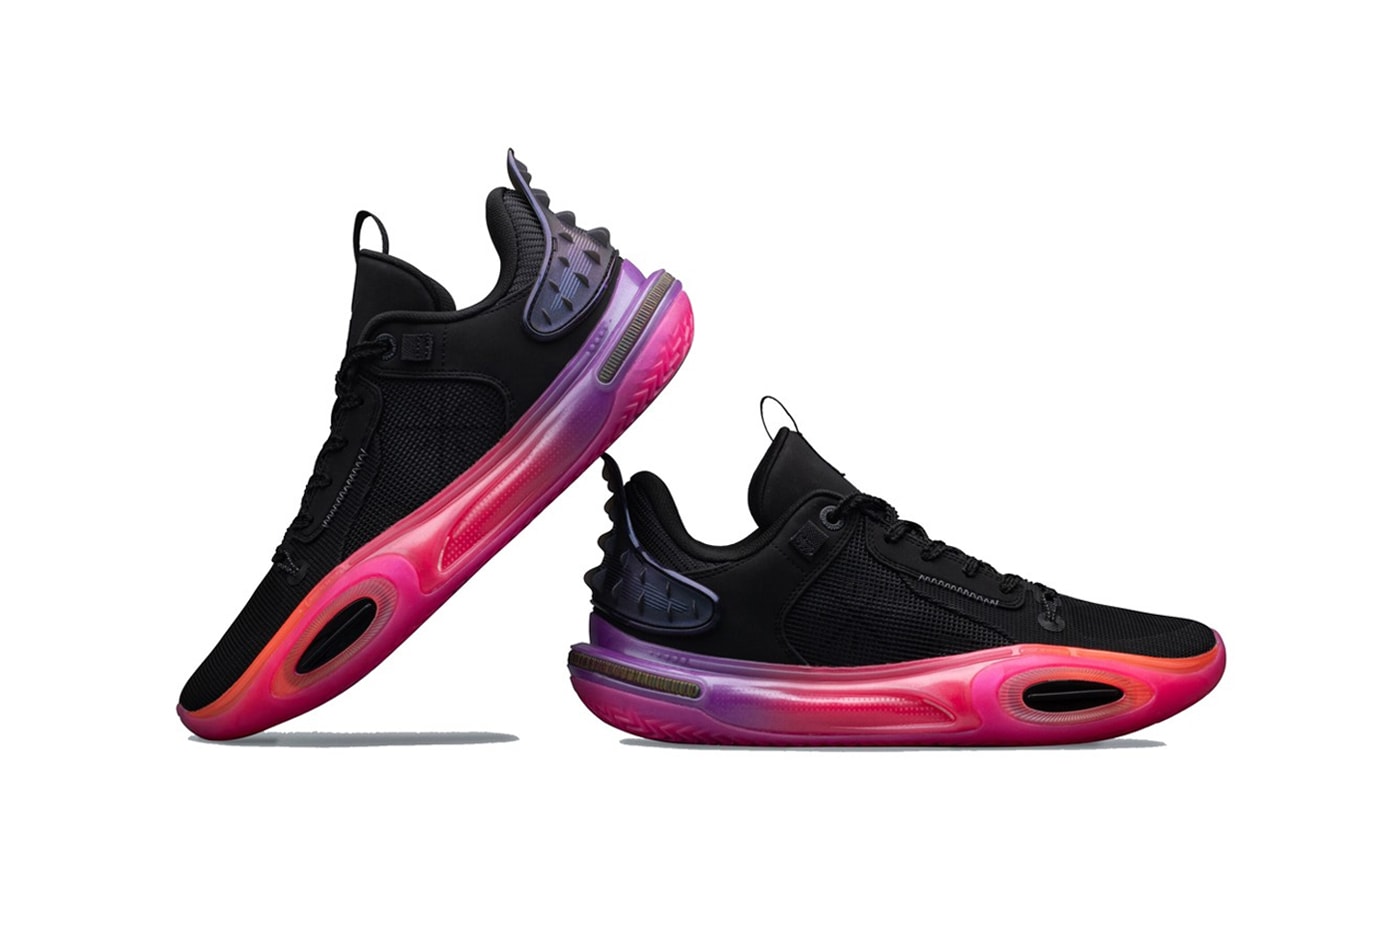 li ning way of dwyane wade all city 11 sneaker shoe sunrise official release date info photos price store list buying guide